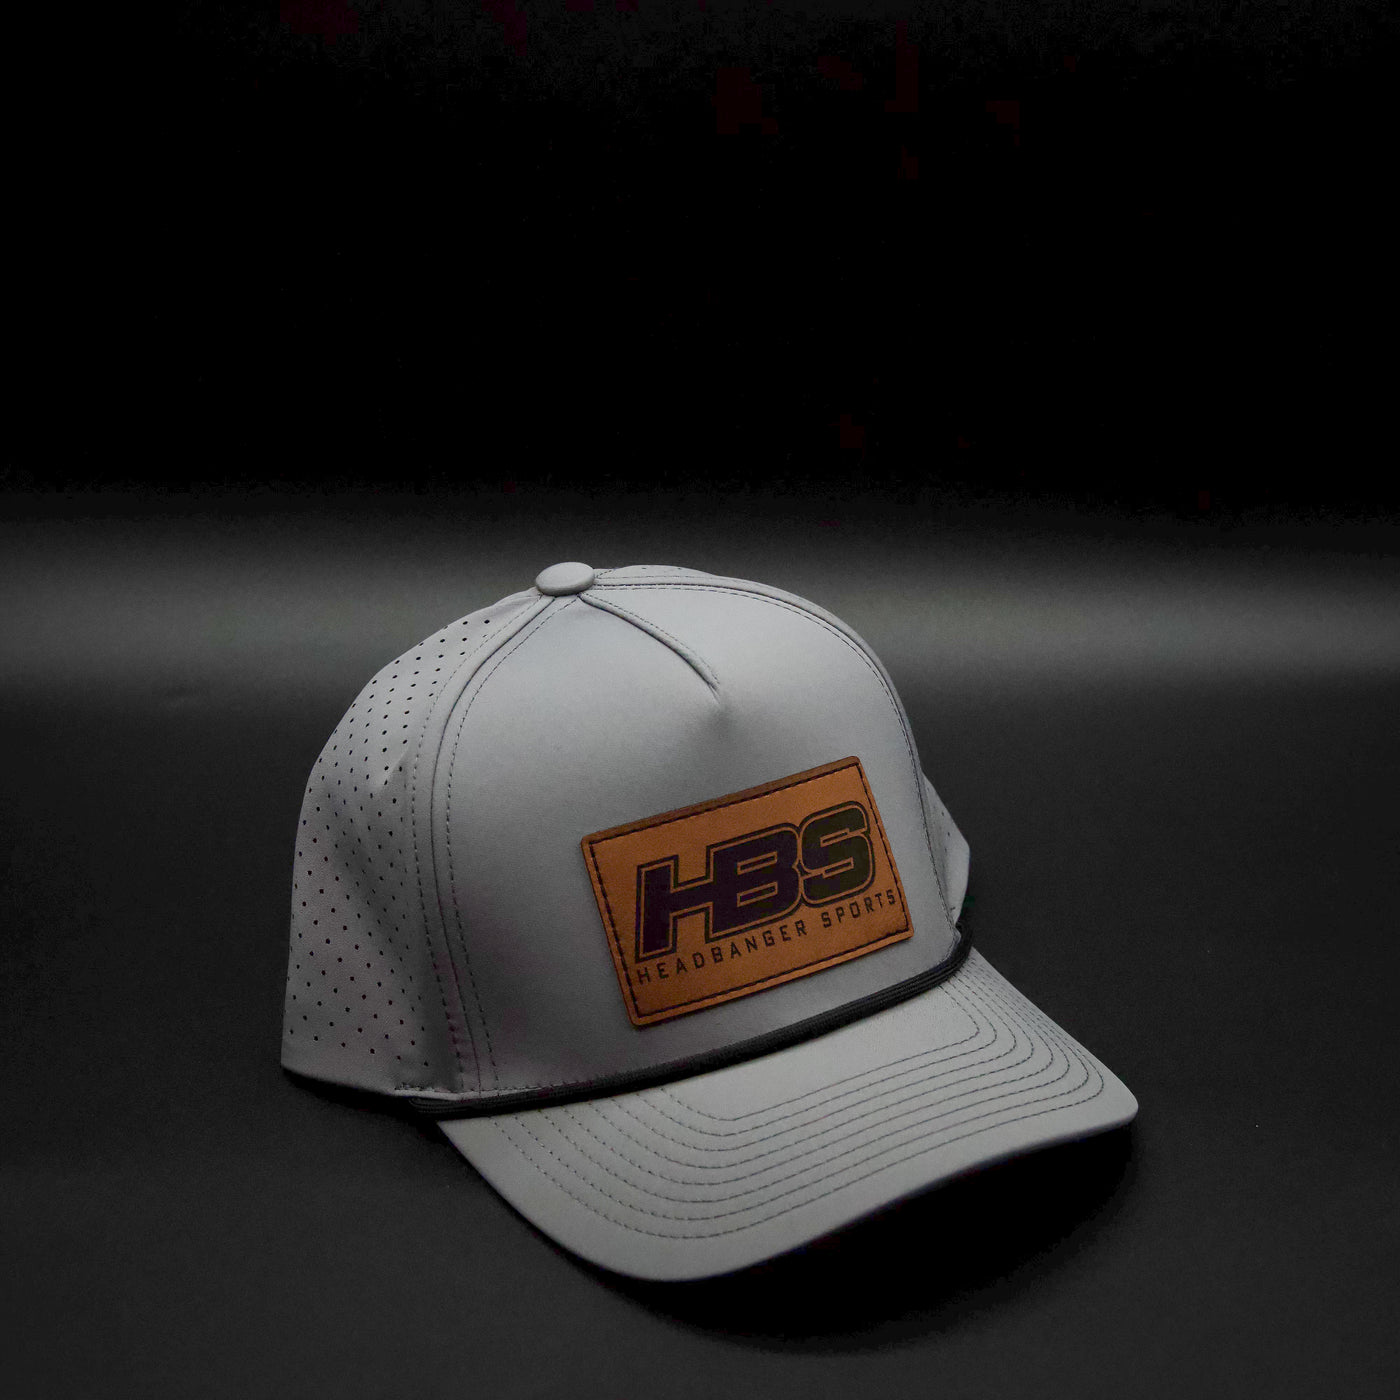 Headbanger Sports Exclusive Graphite P424 Perforated Snapback Lifestyle Faux Leather Patch Hat: Rawhide HBS Patch